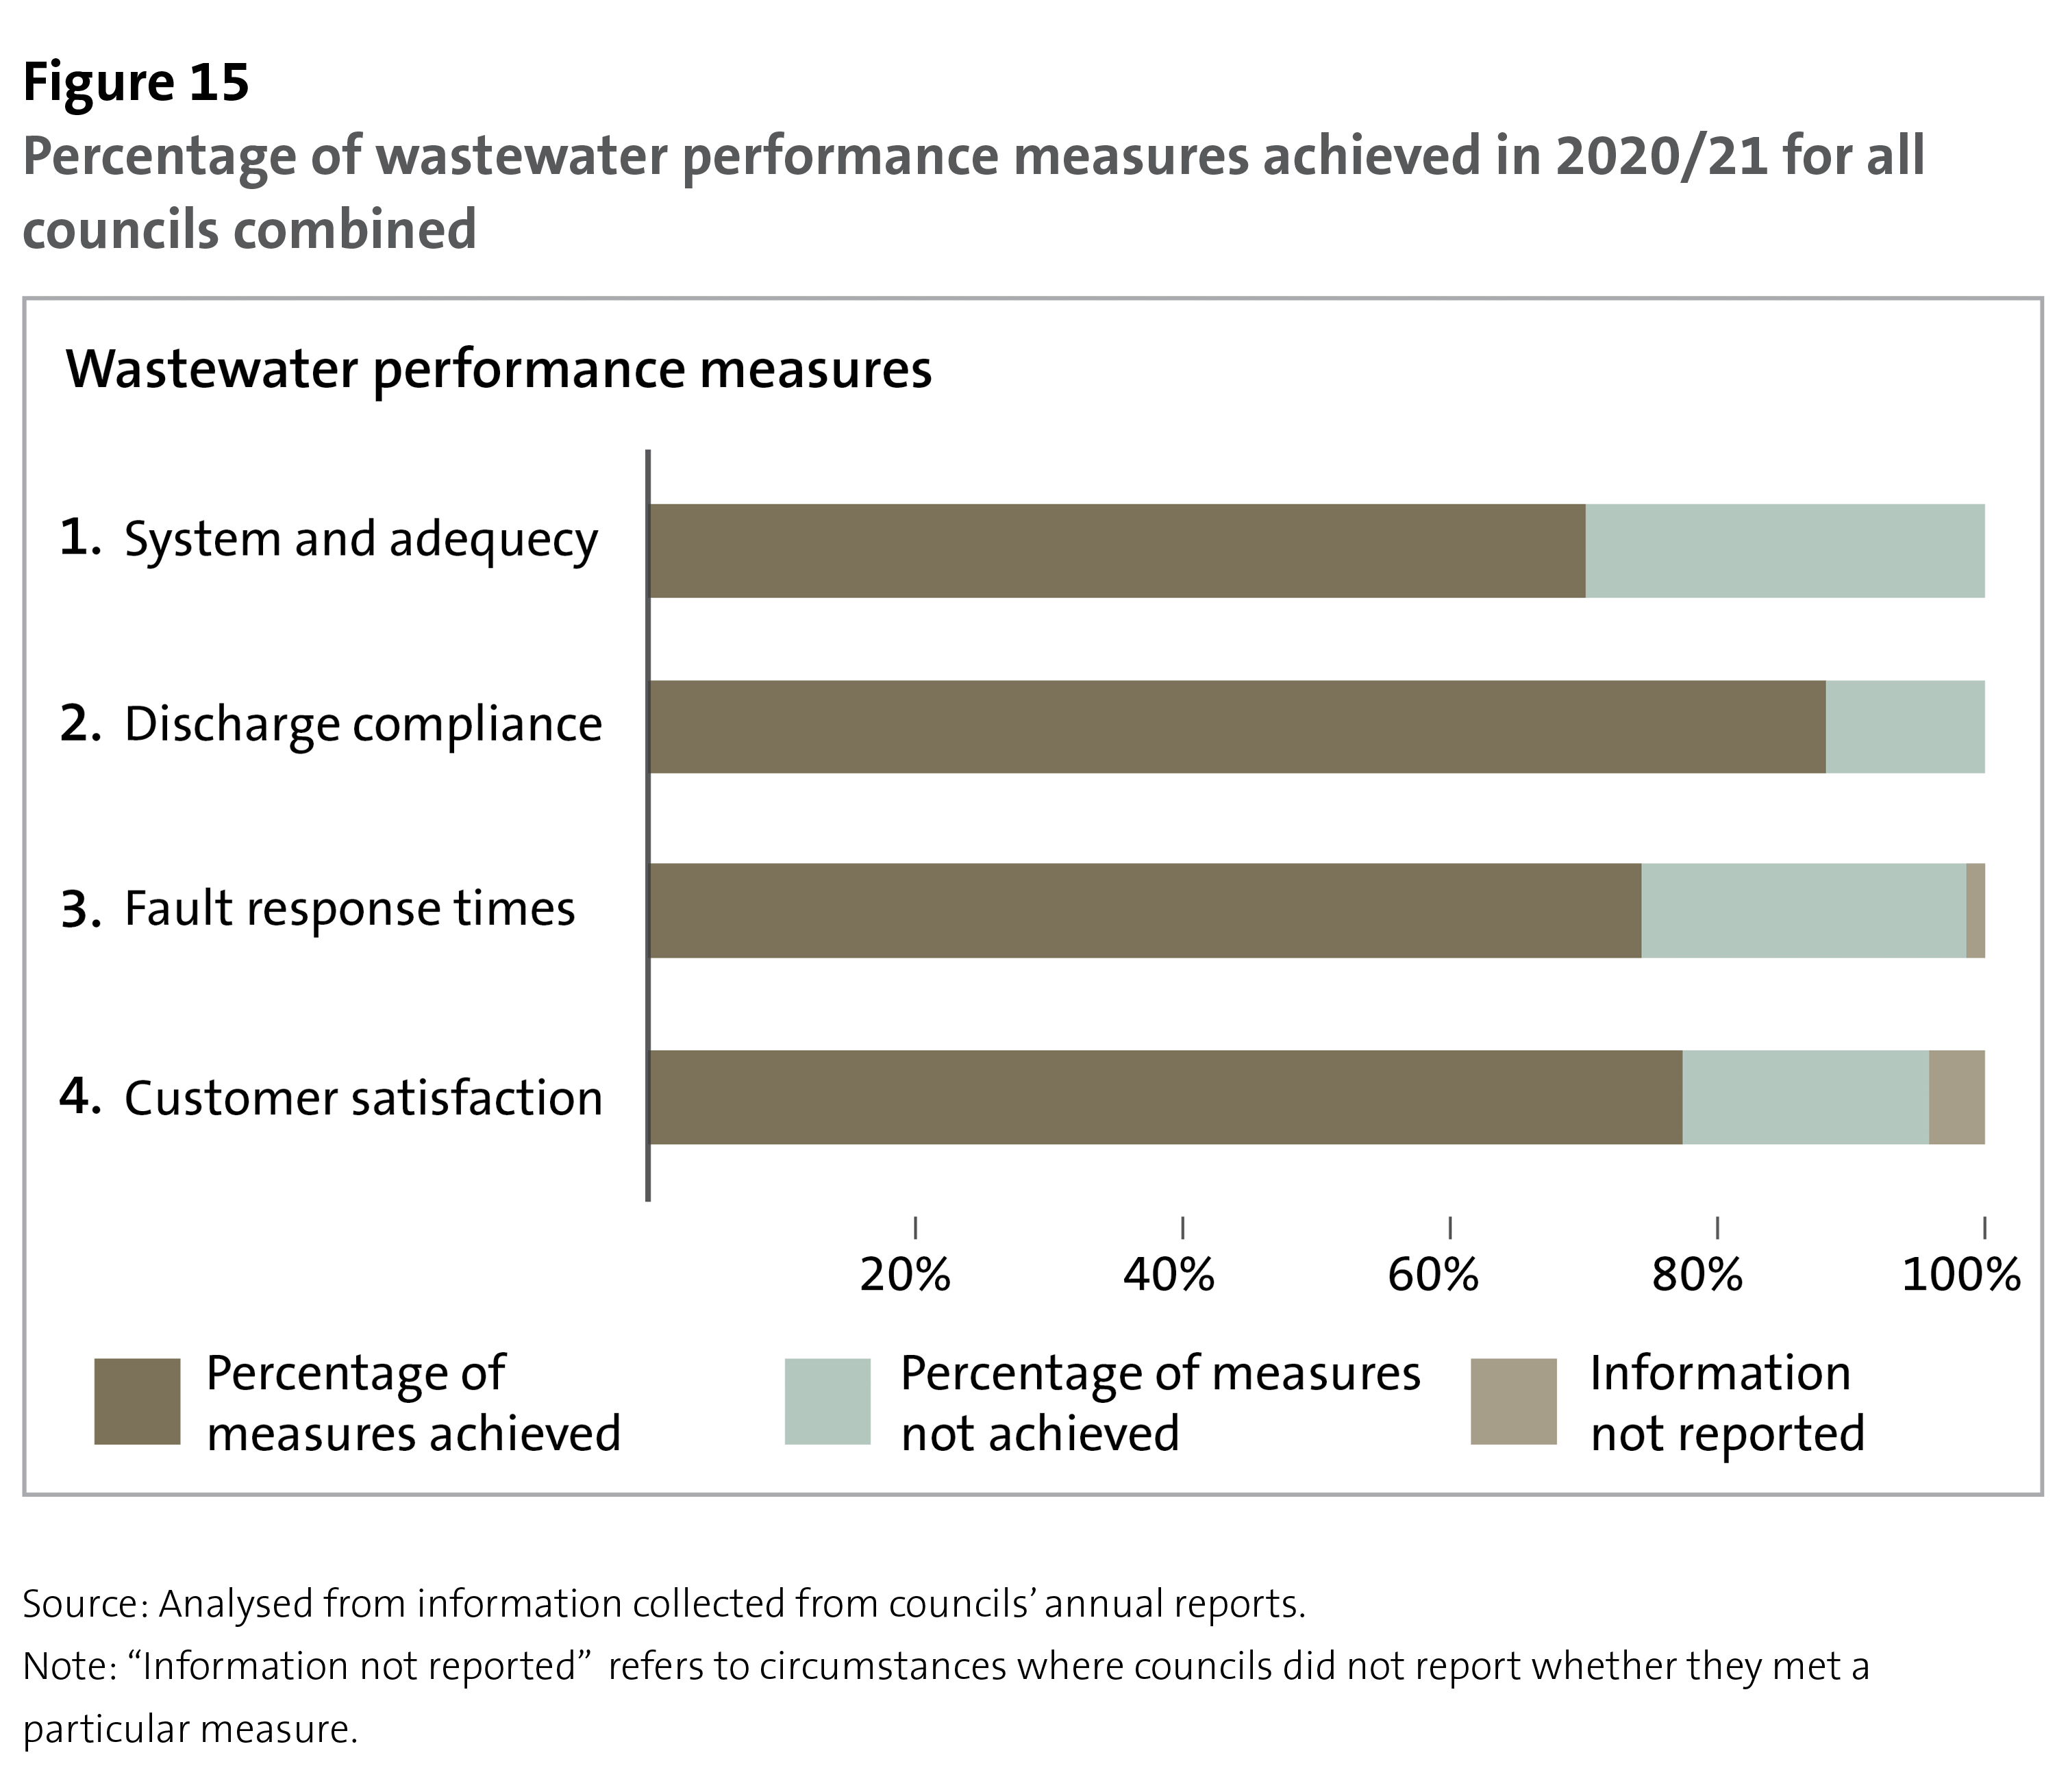 Figure 15 - Percentage of wastewater performance measures achieved in 2020/21 for all councils combined